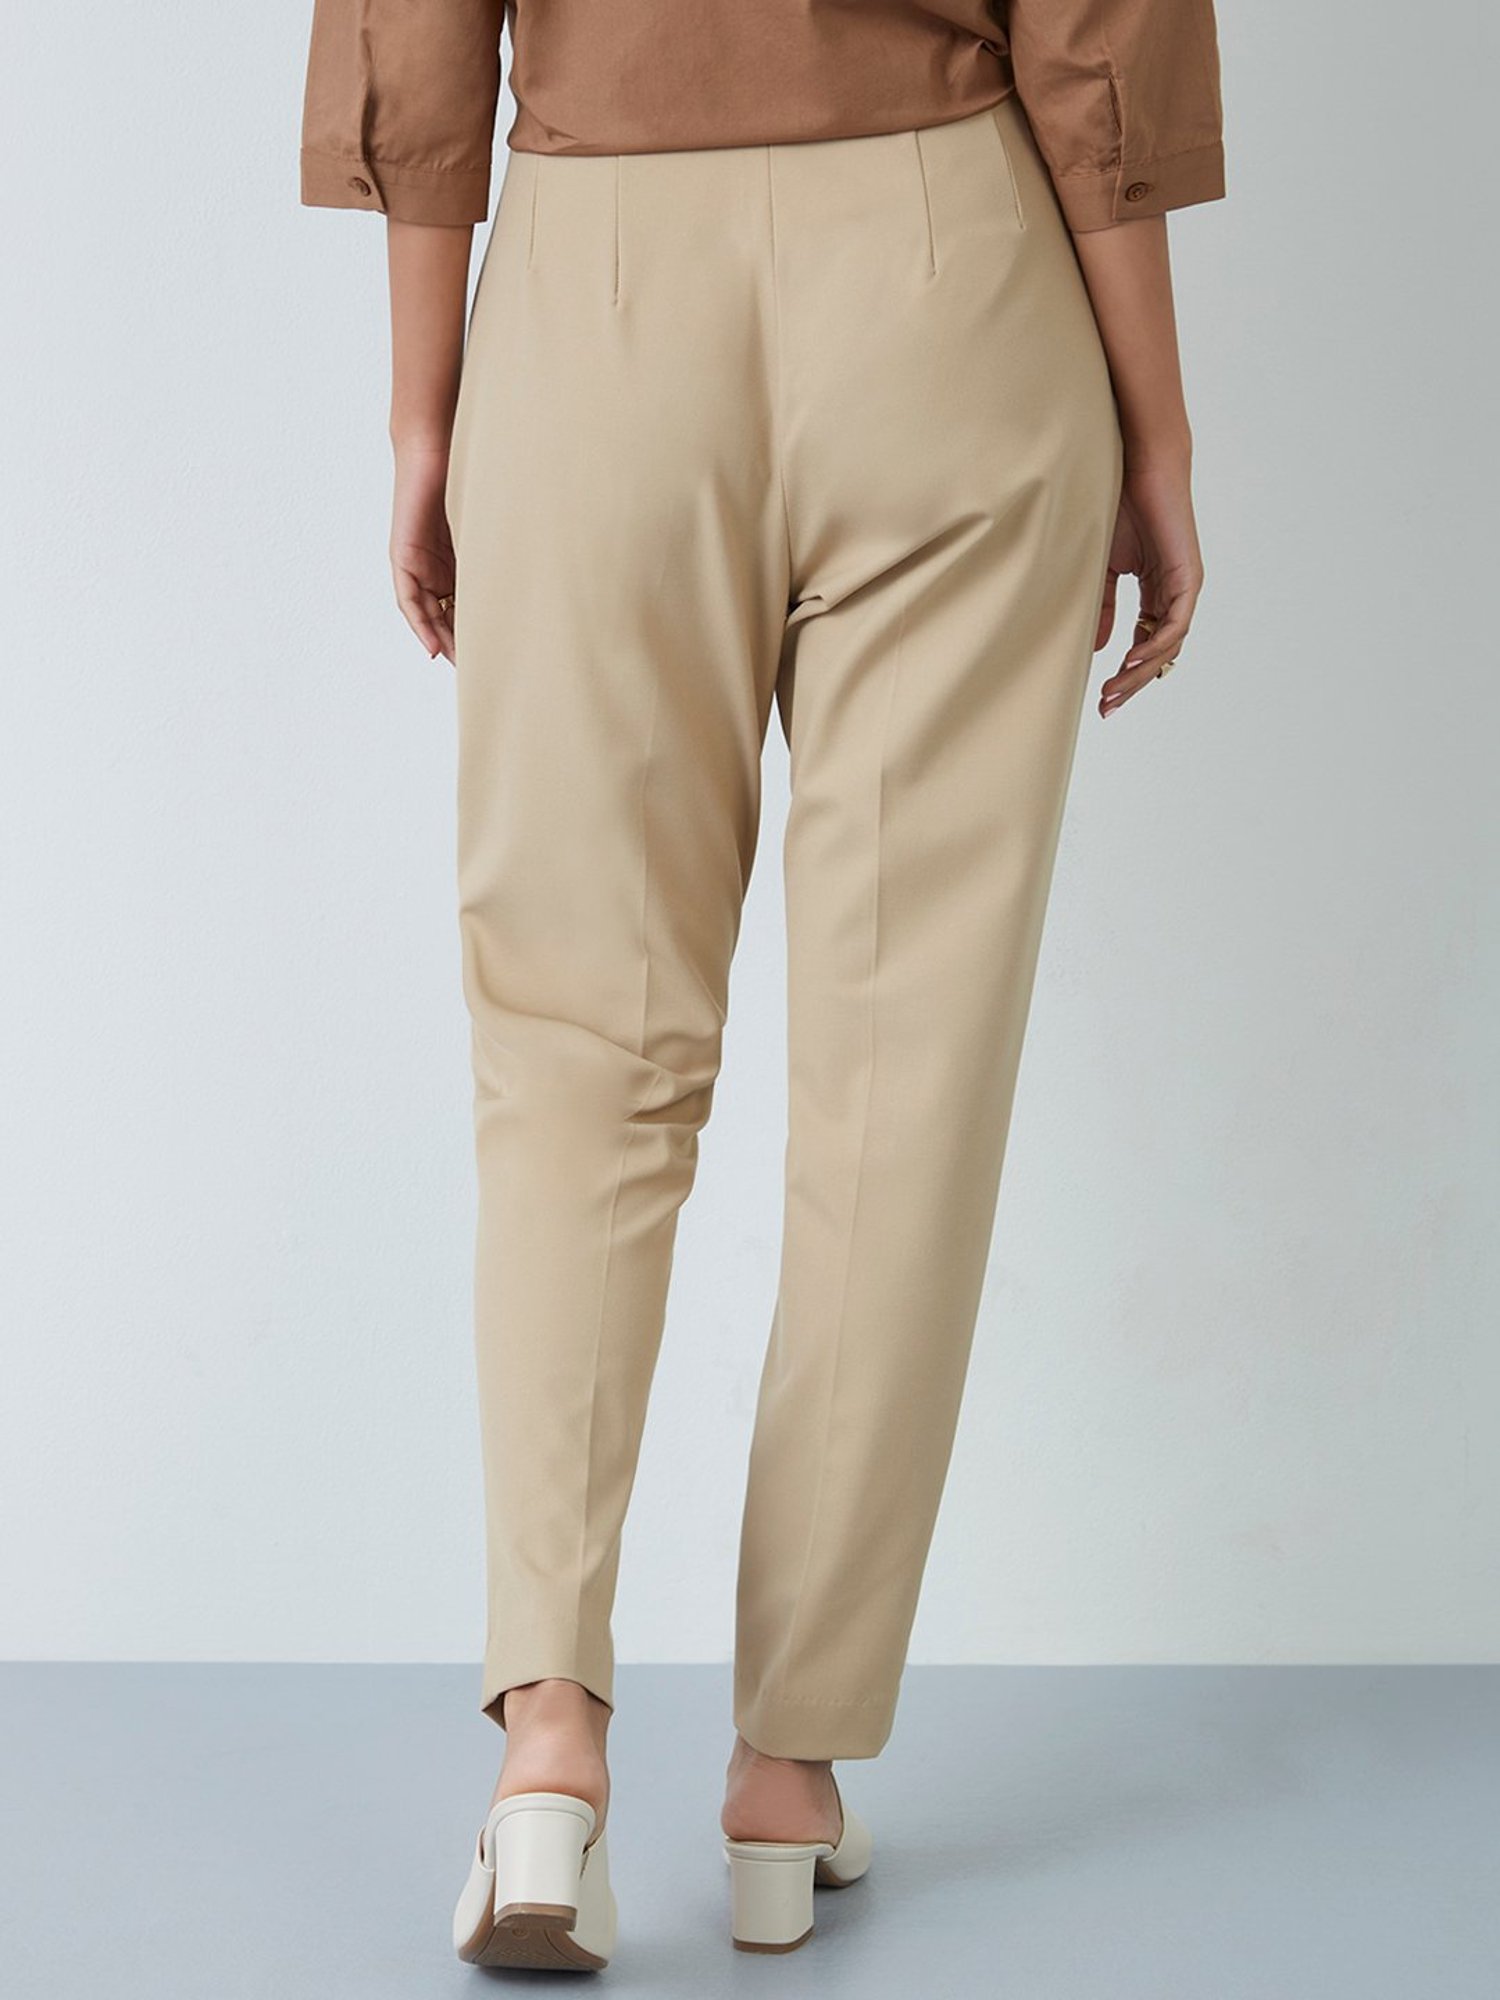 FRATINI WOMAN by Shoppers Stop Regular Fit Regular Length Polyester Womens  Trousers Beige 32  Amazonin Fashion